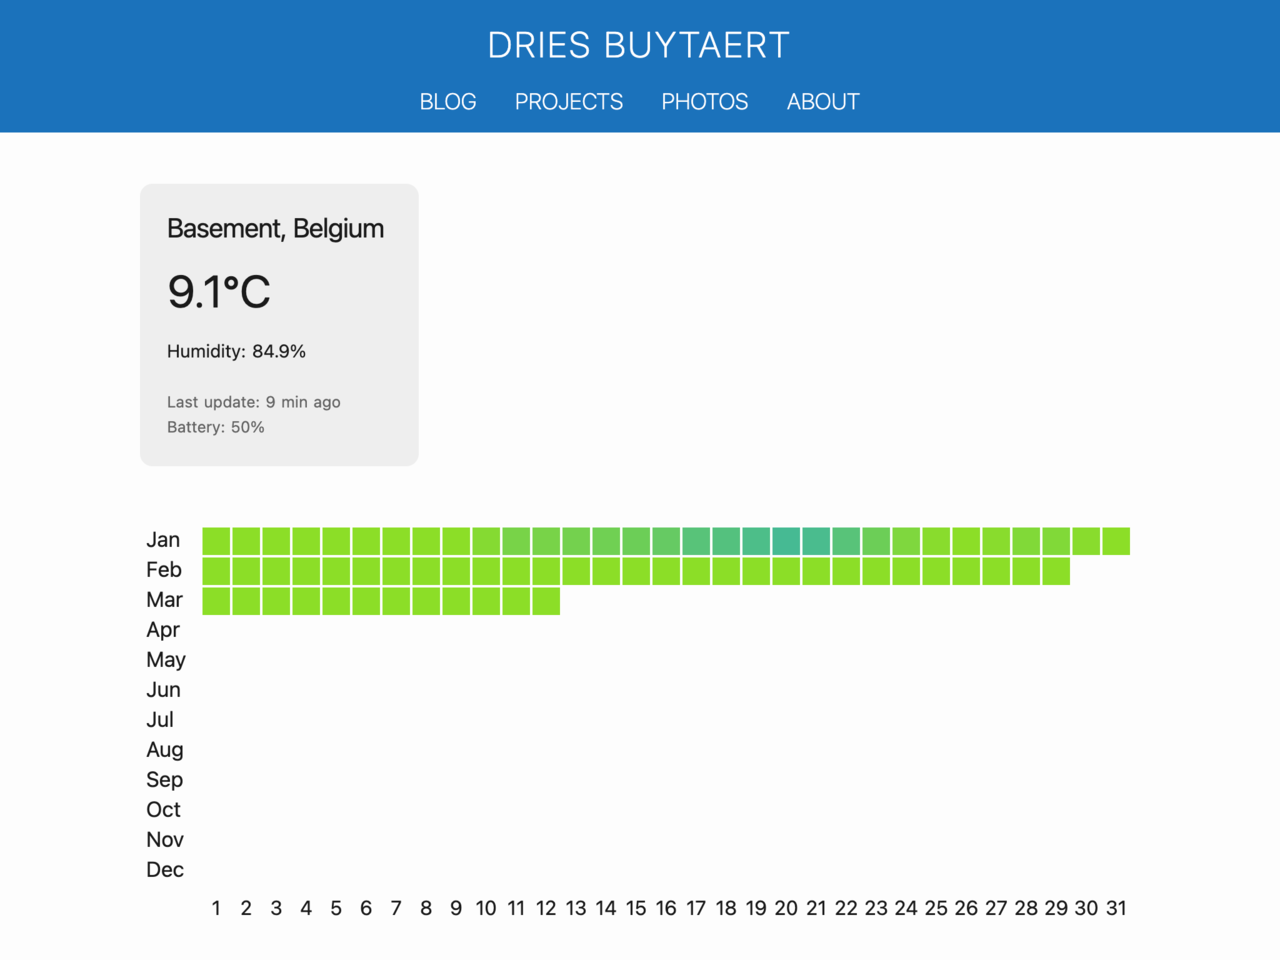 A webpage displaying temperature and humidity readings for a basement in Belgium.